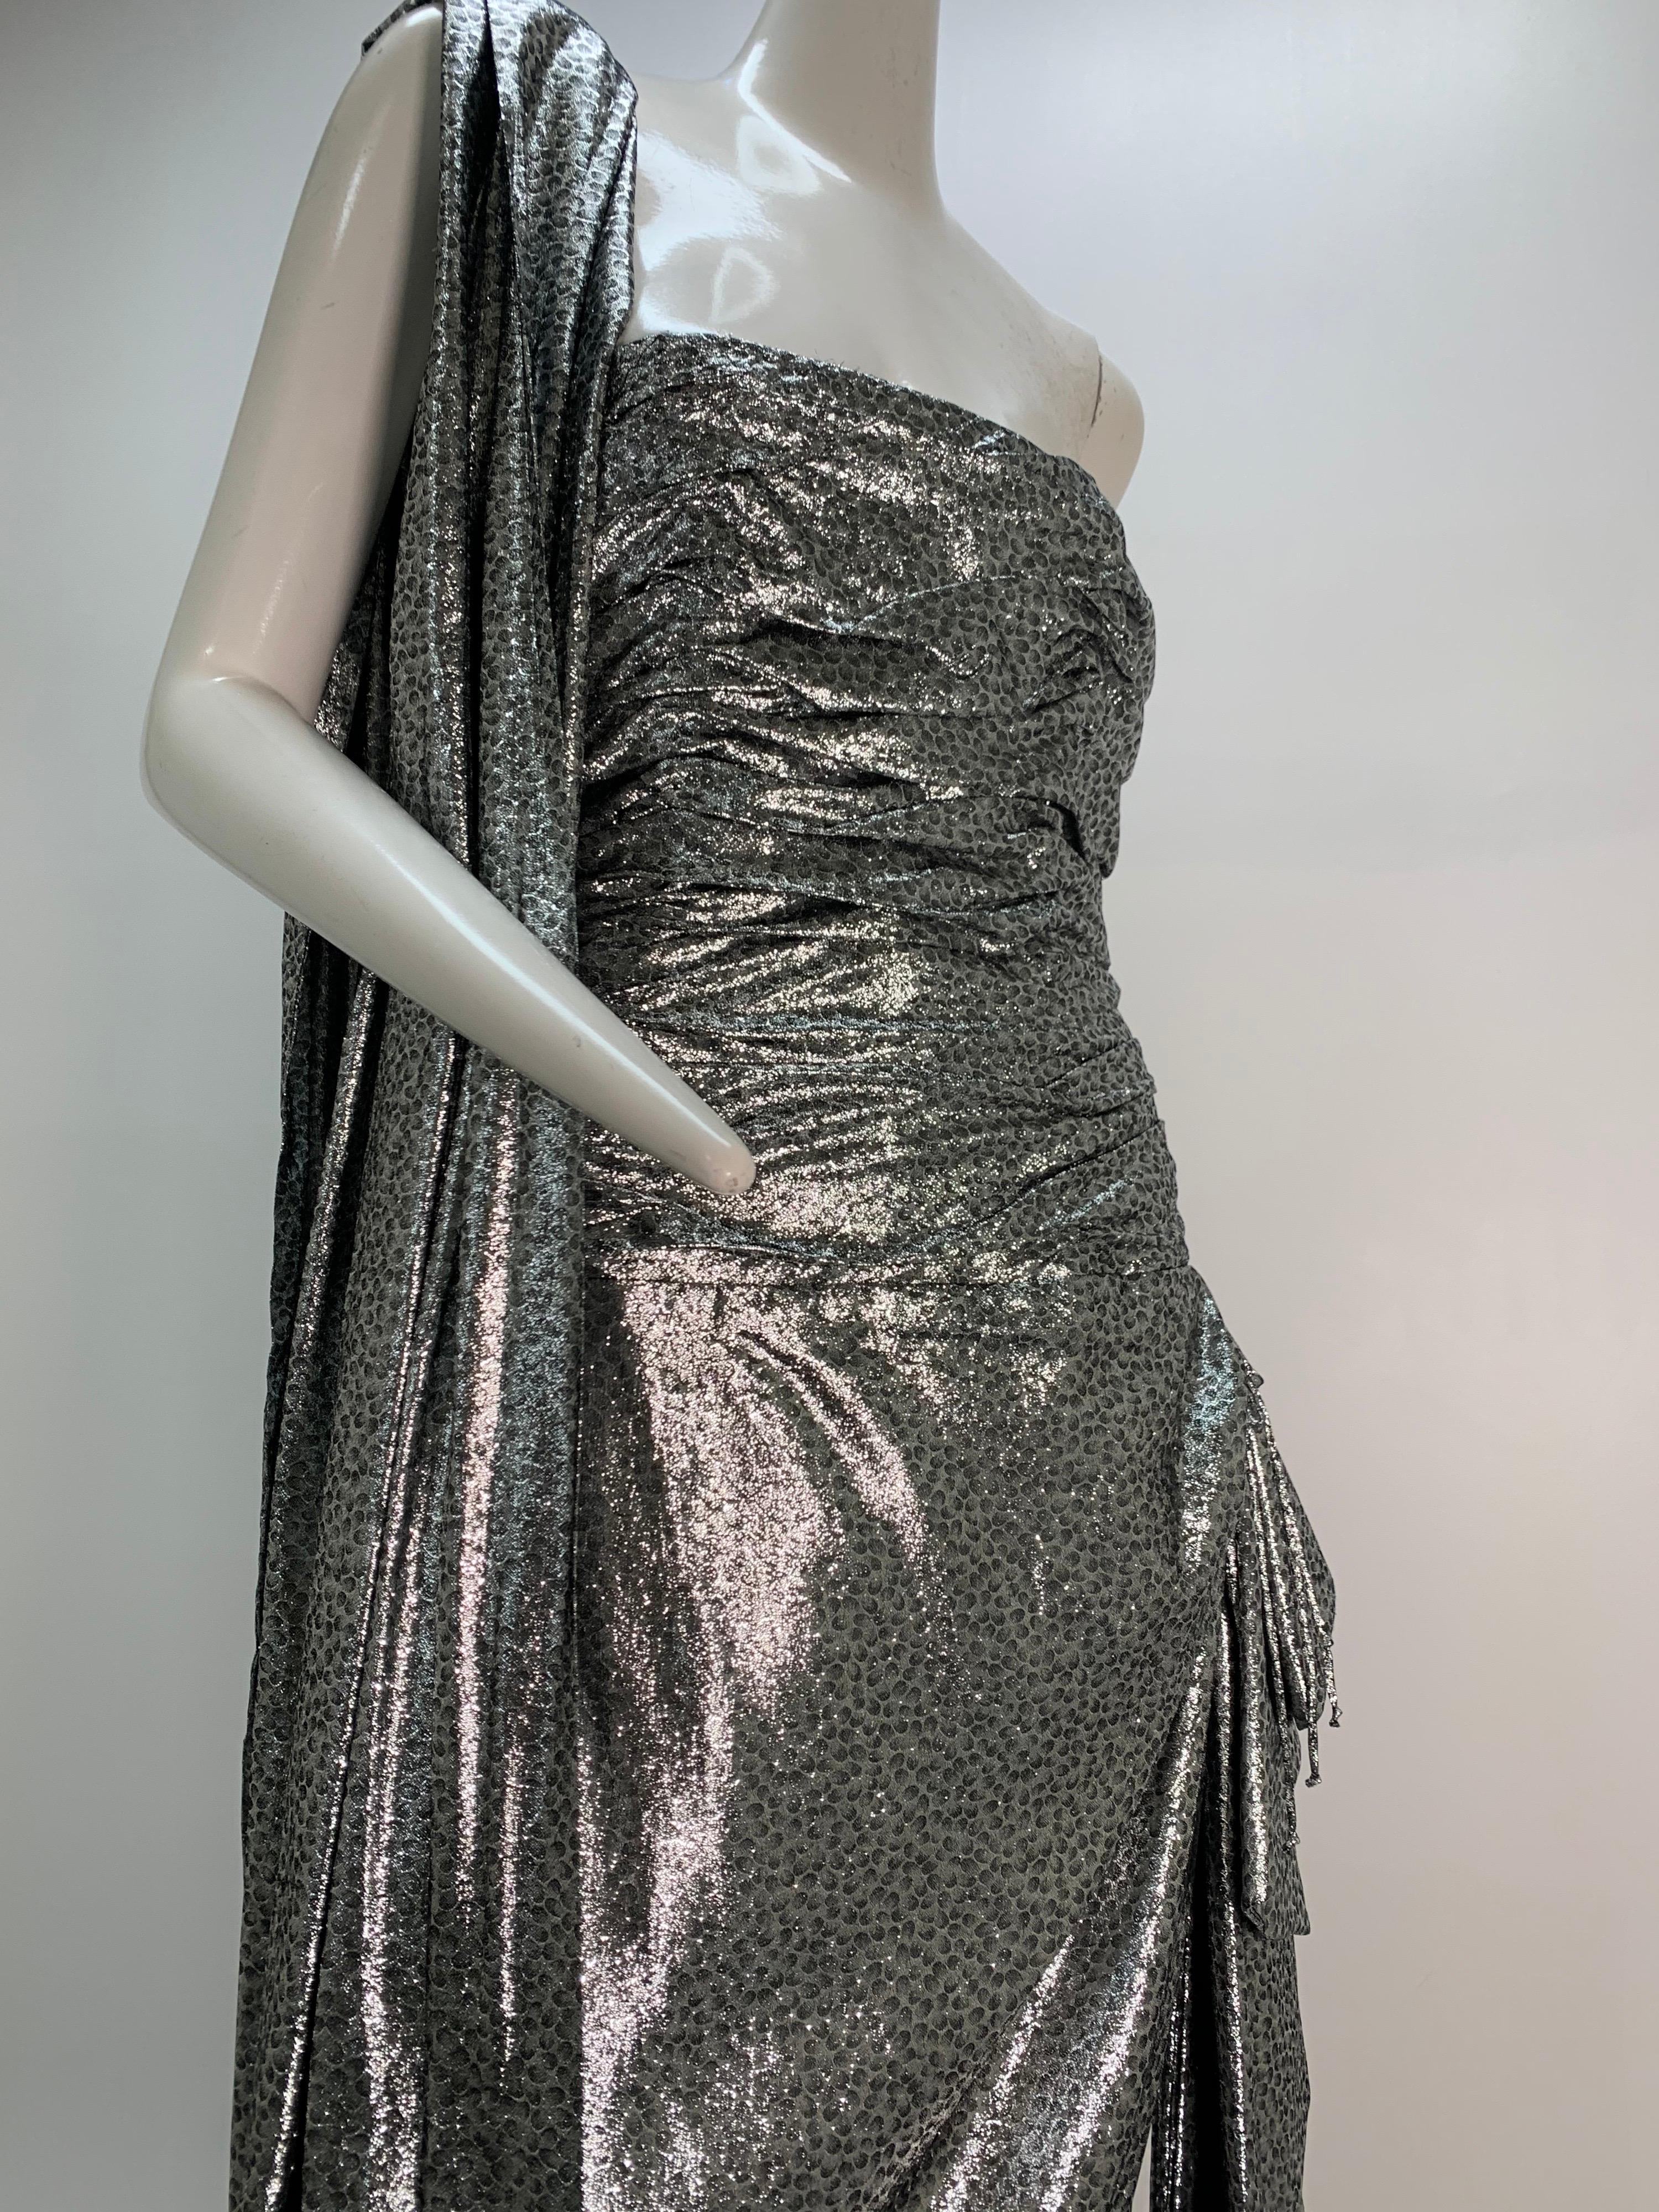 1980s William Travilla Strapless Corset-Bodice Gown in Silver Lame w/ Foulard: Boned strapless bodice is ruched to the hip with a swag caught up at a bow on the side. Back zipper. Matching original foulard is included. Asymmetrical hem for dramatic